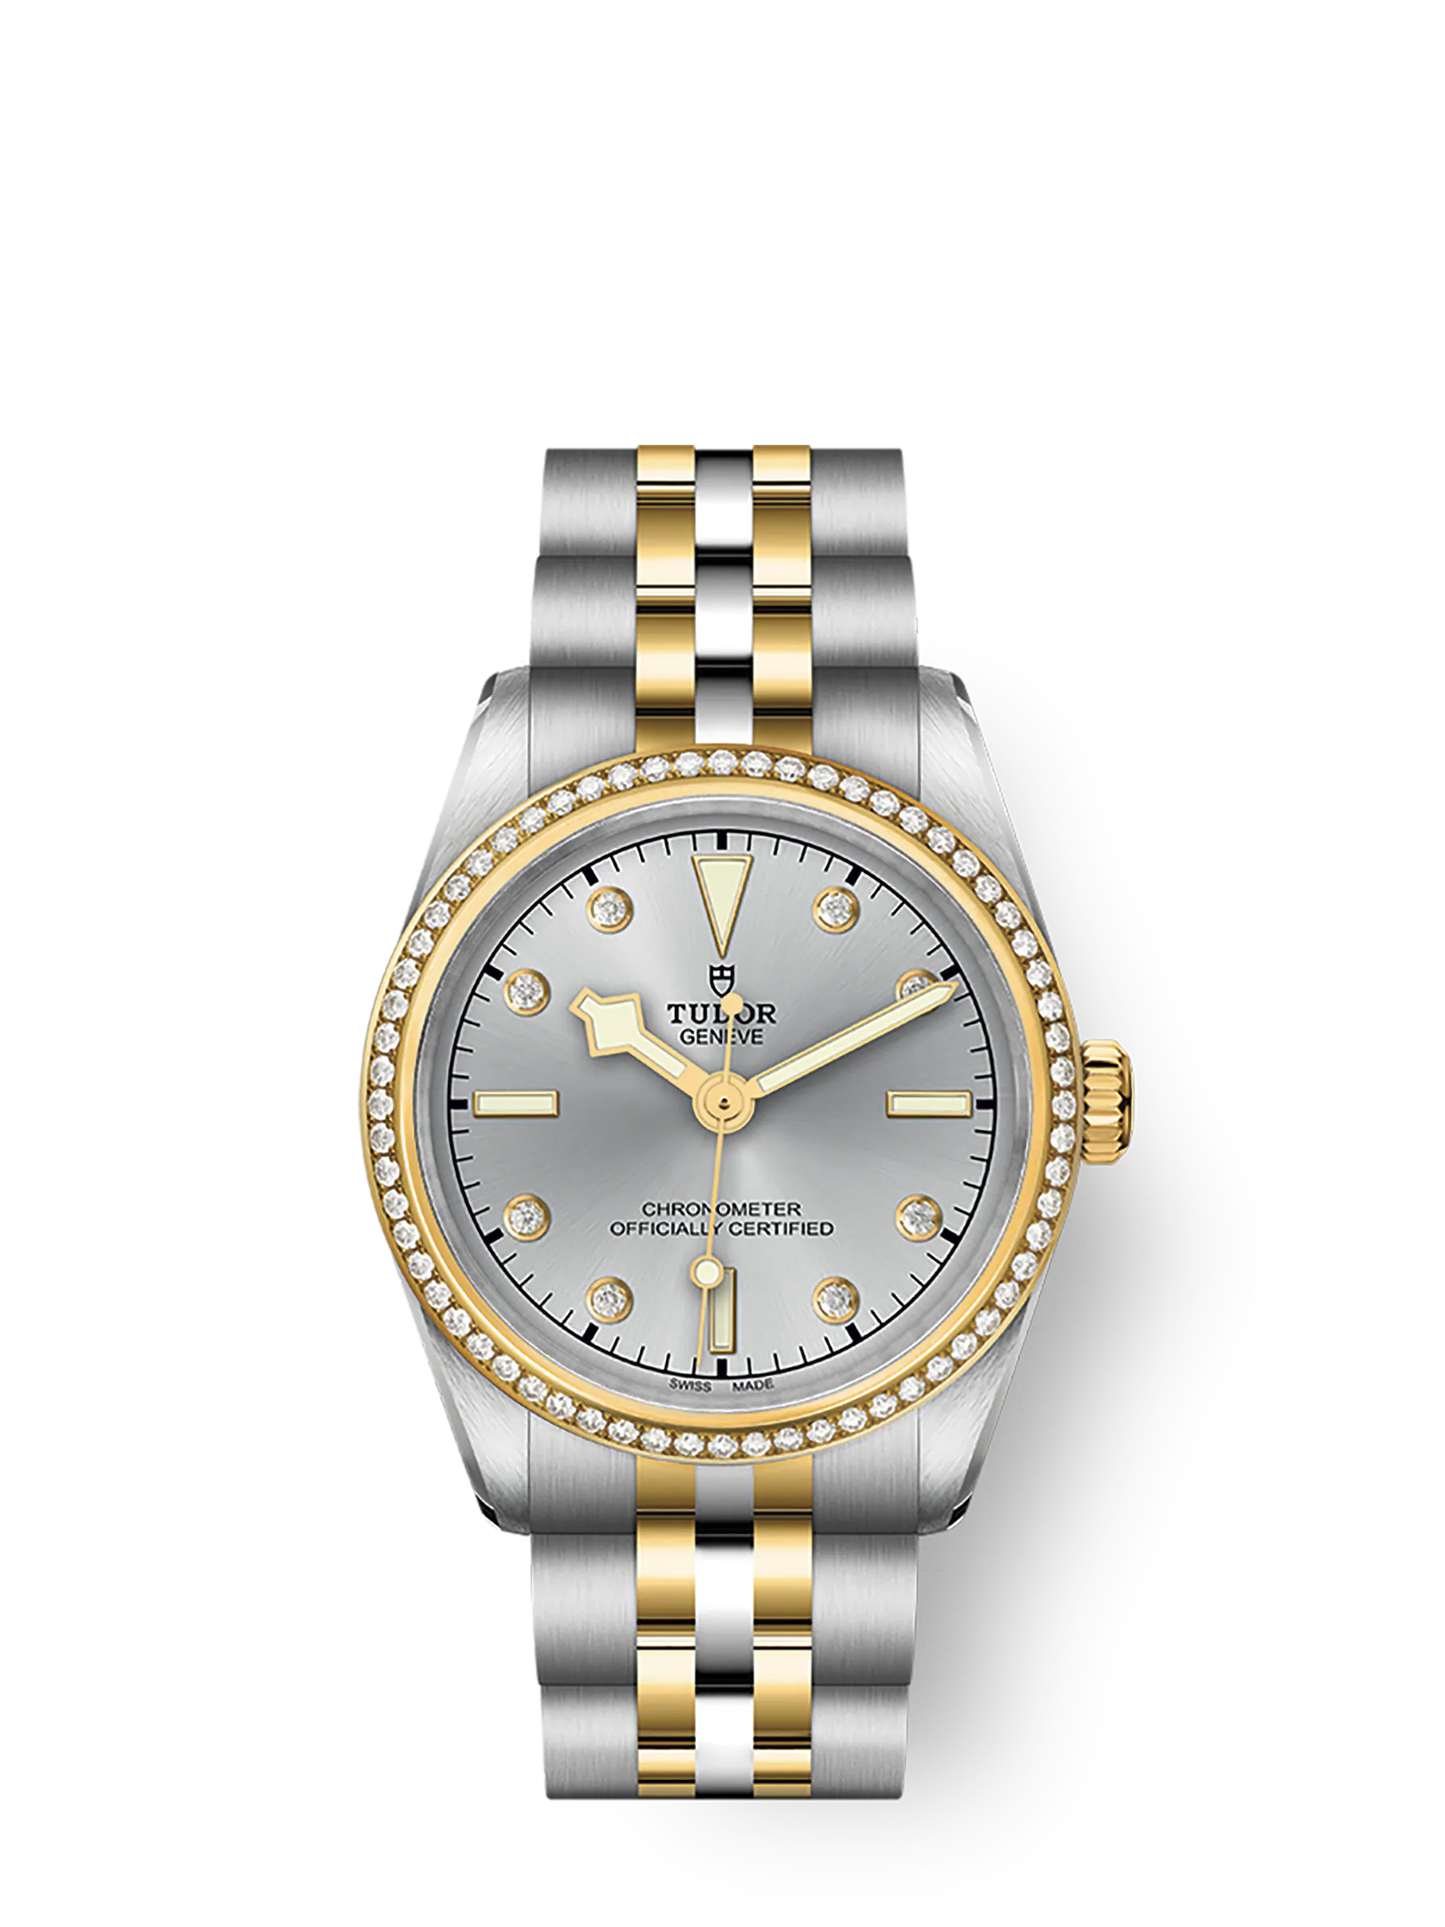 Tudor Black Bay 31 S&G, 316L Stainless Steel, 18k Yellow Gold and Diamonds, Ref# M79613-0006